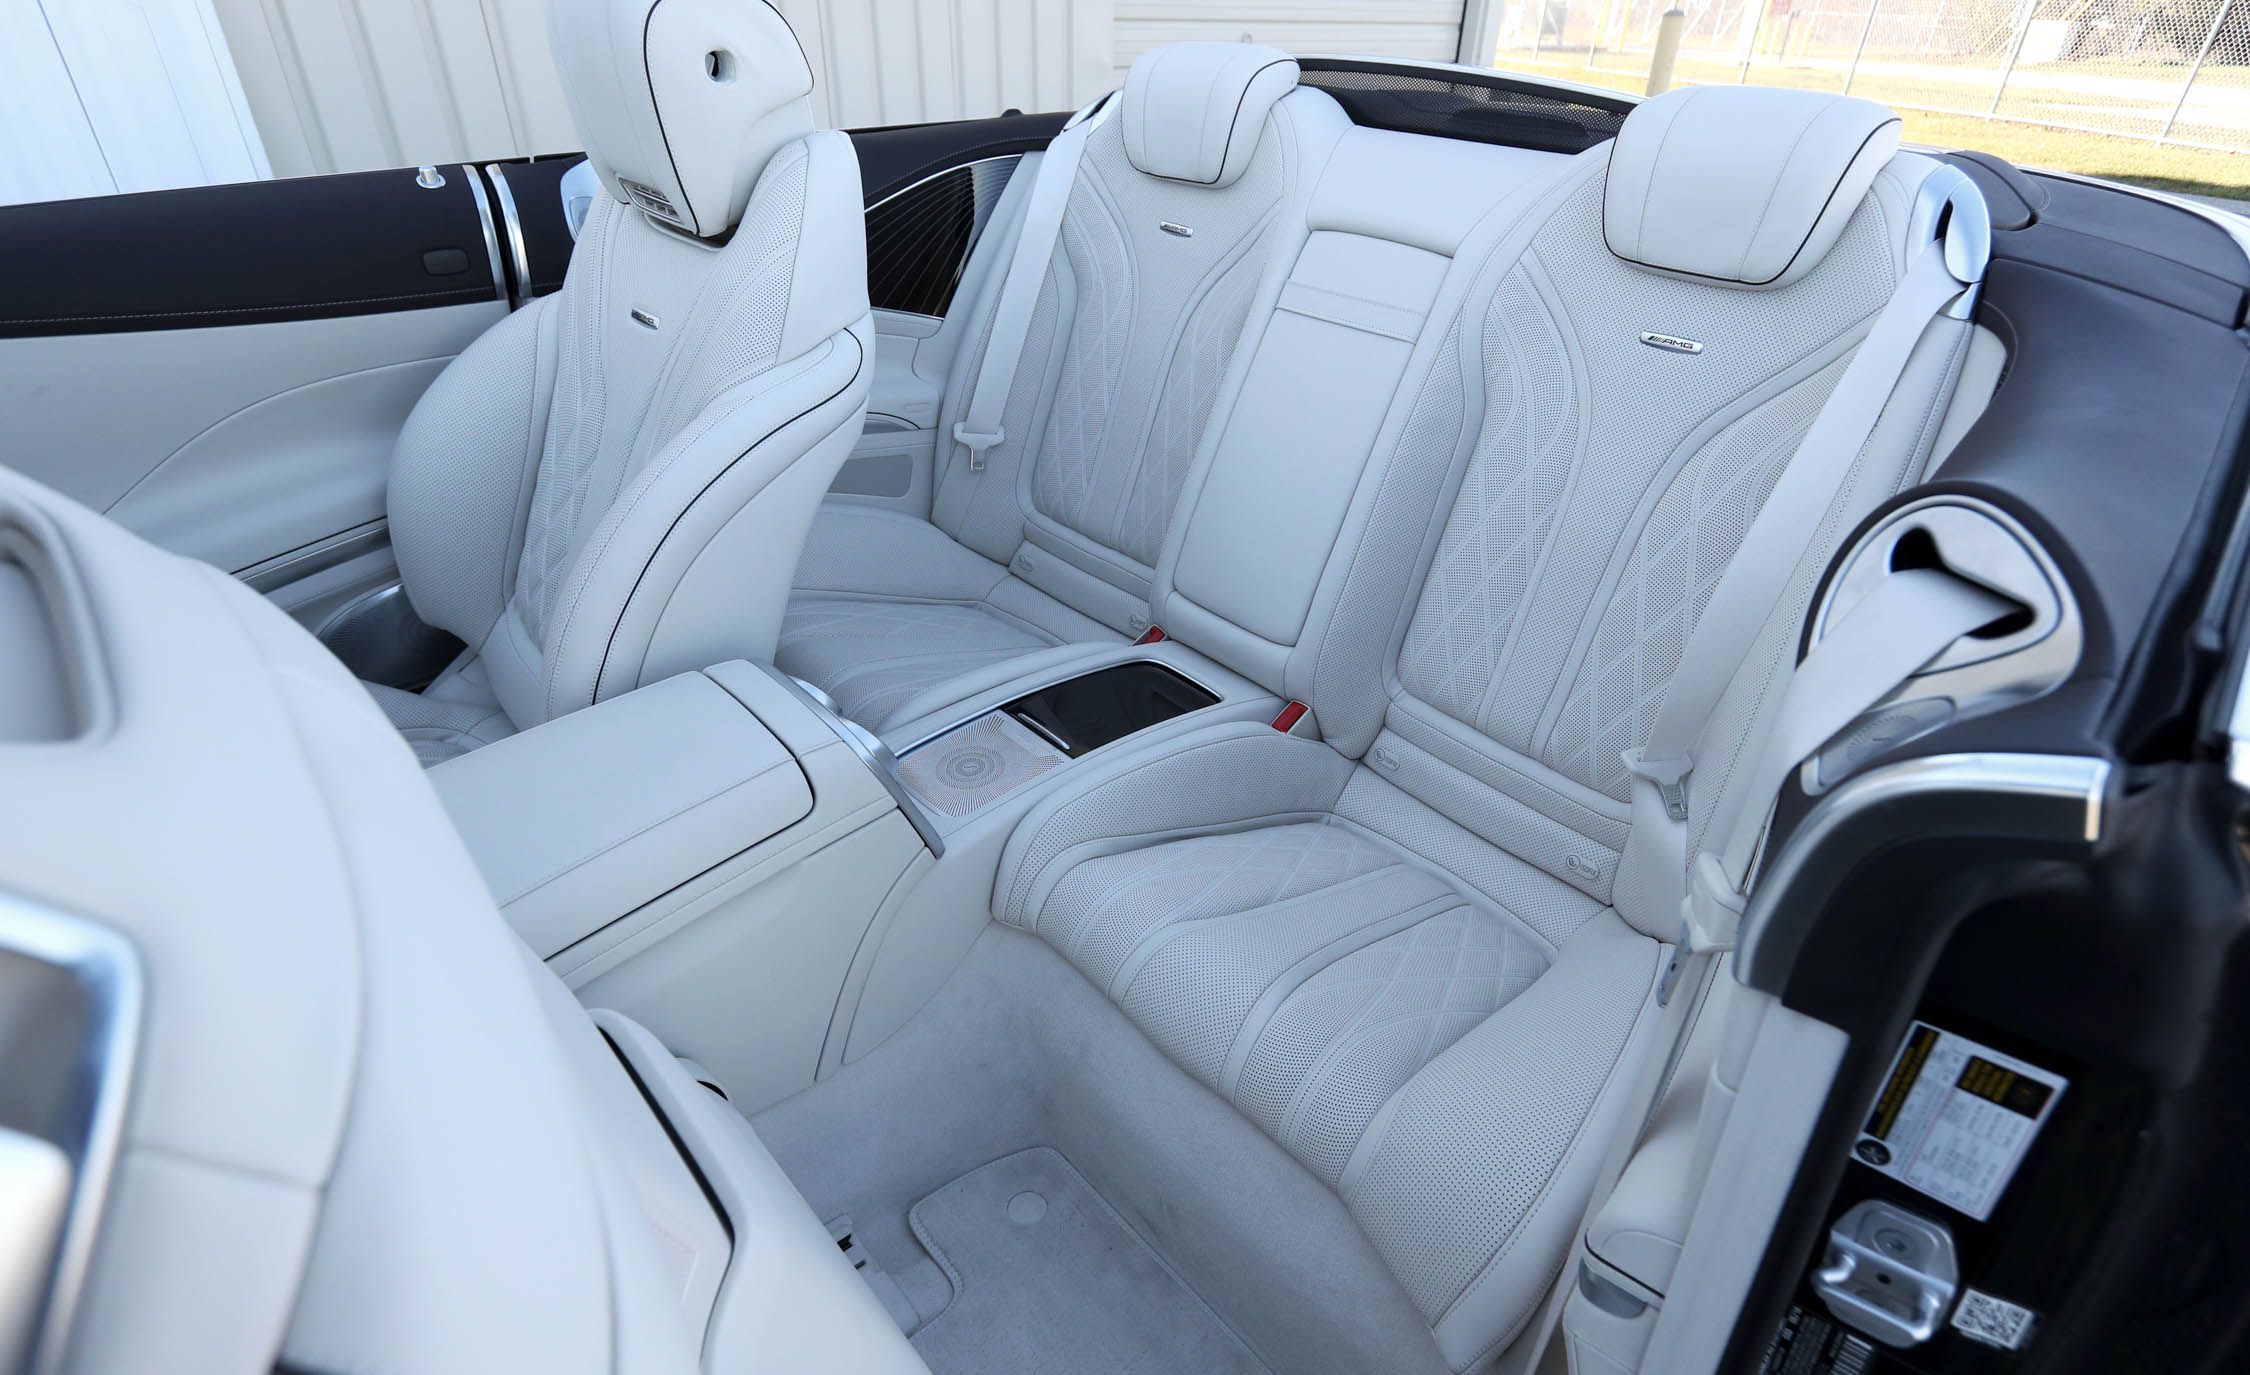 2017 Mercedes Amg S63 Cabriolet Interior Seats Rear Passengers (View 20 of 38)